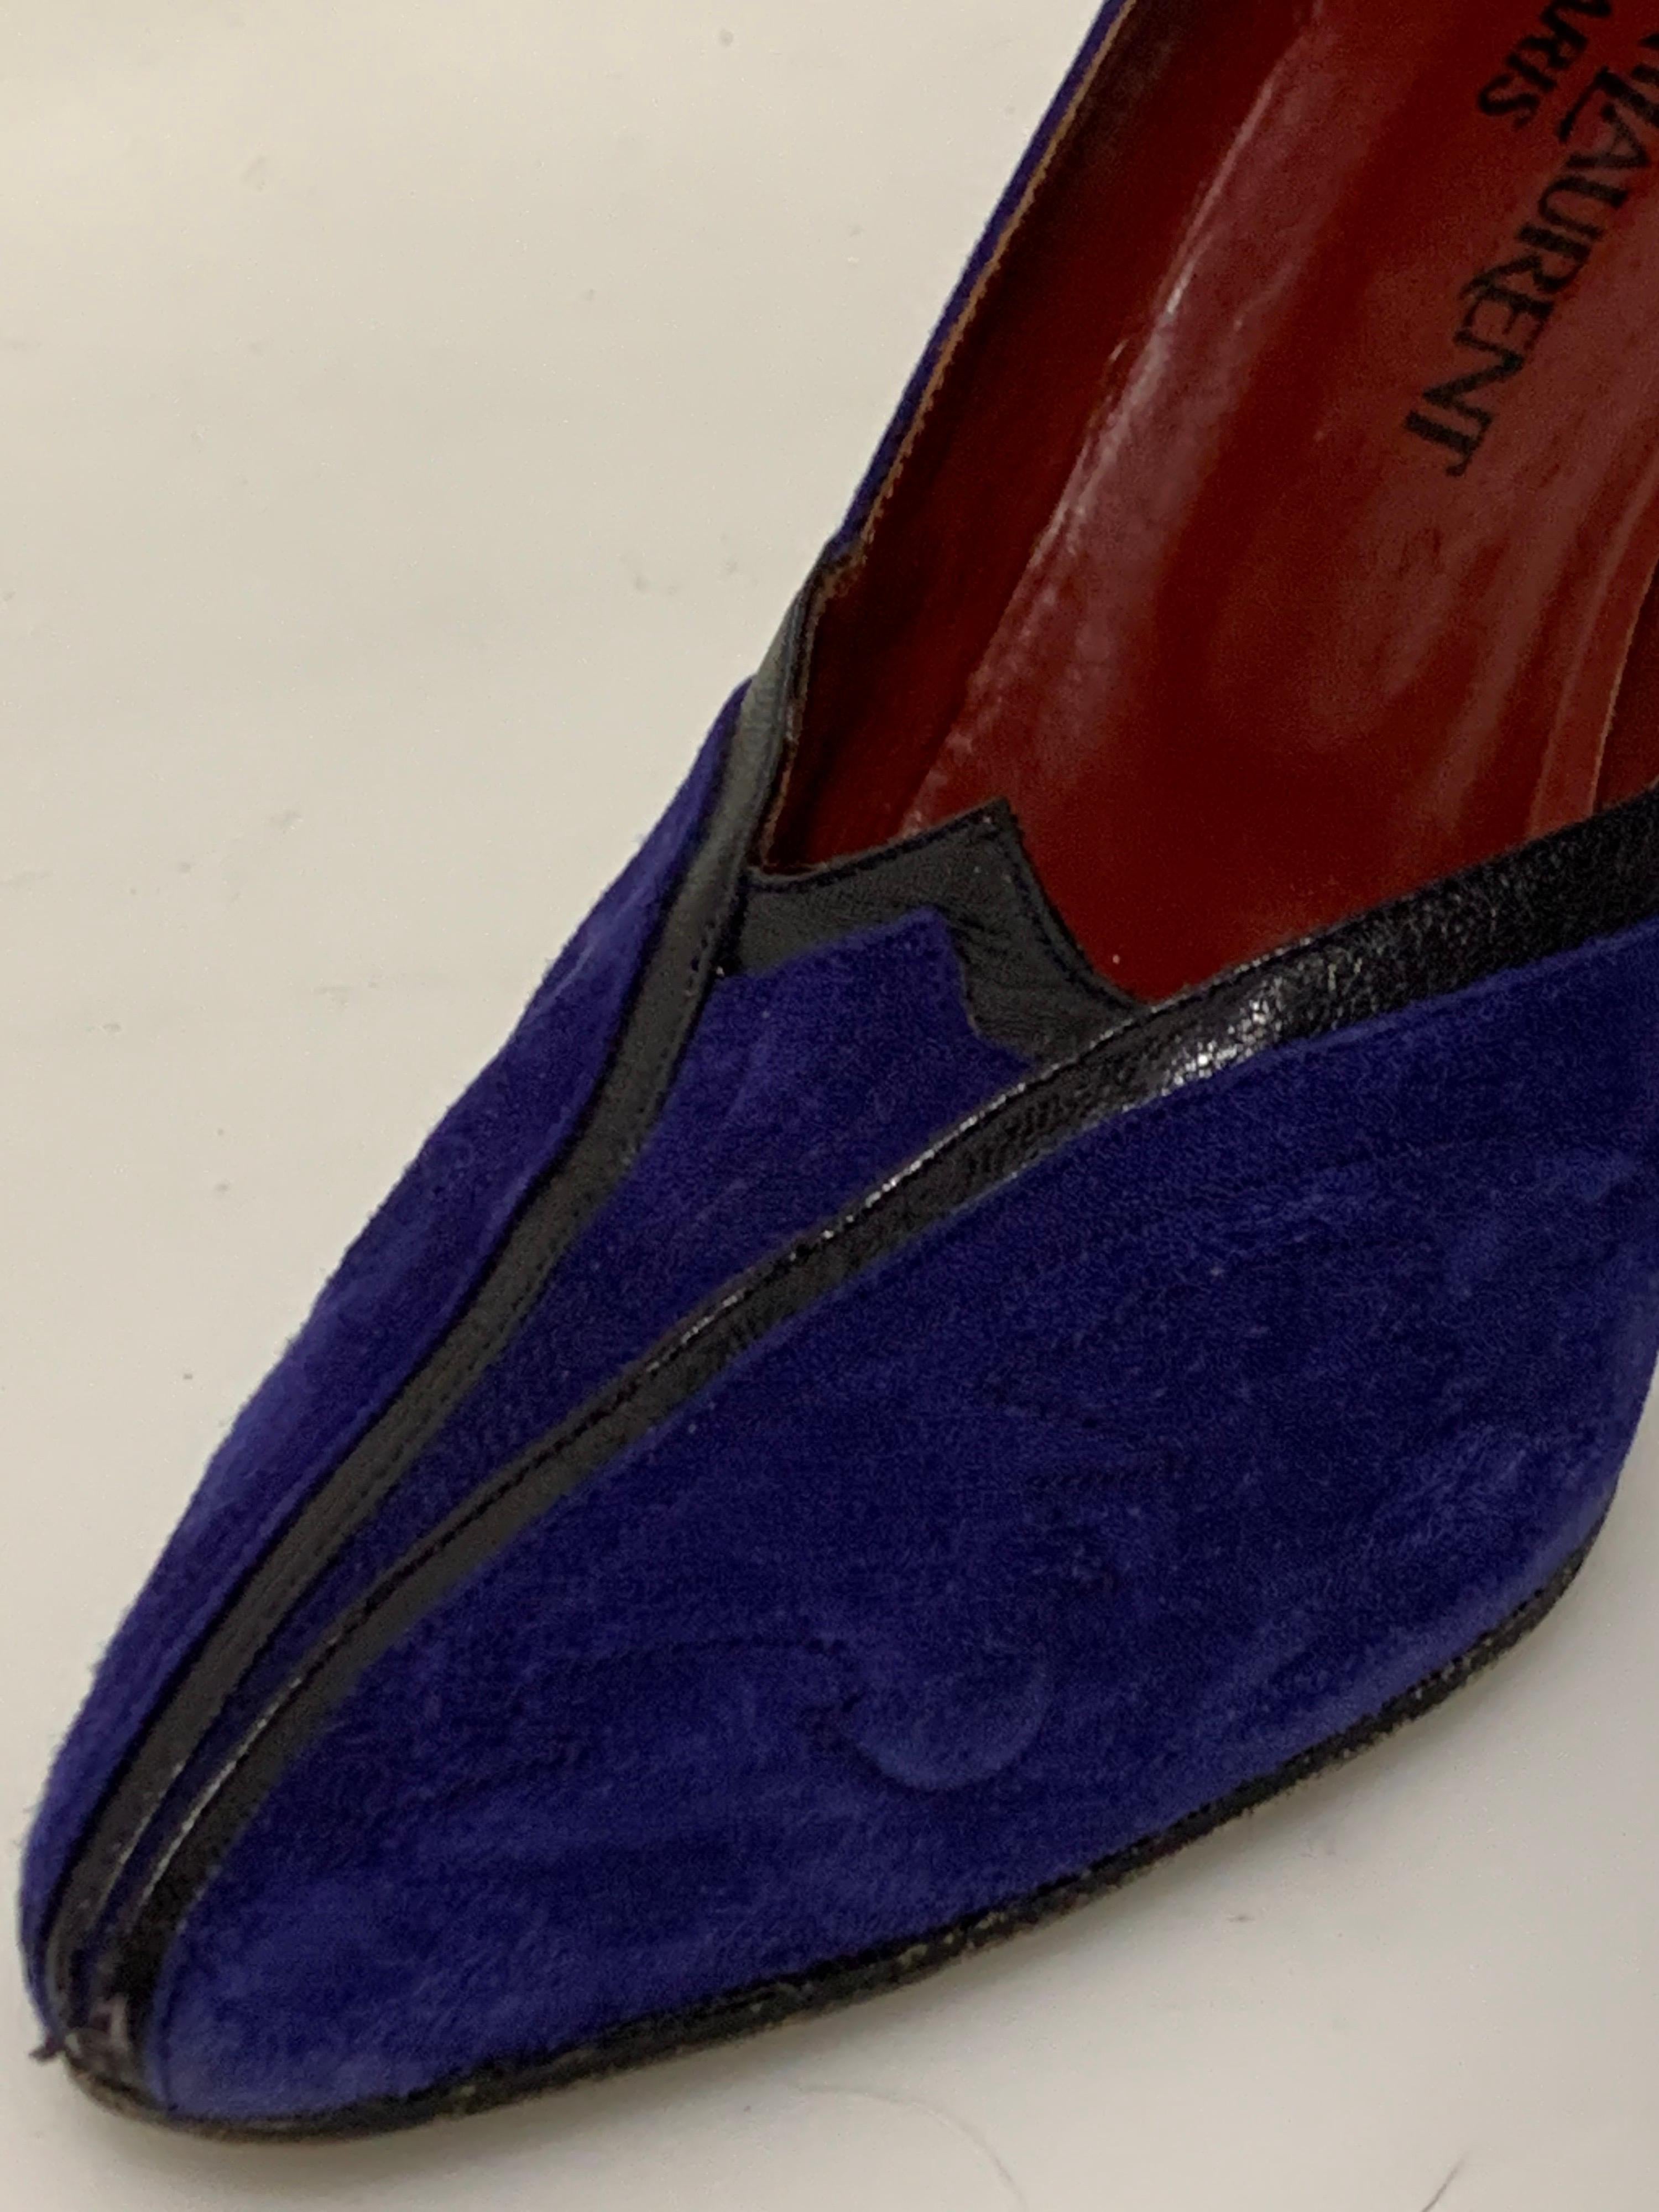 1980 Yves Saint Laurent Electric Purple Suede Pumps W/Black Piping Size 10M In Good Condition For Sale In Gresham, OR